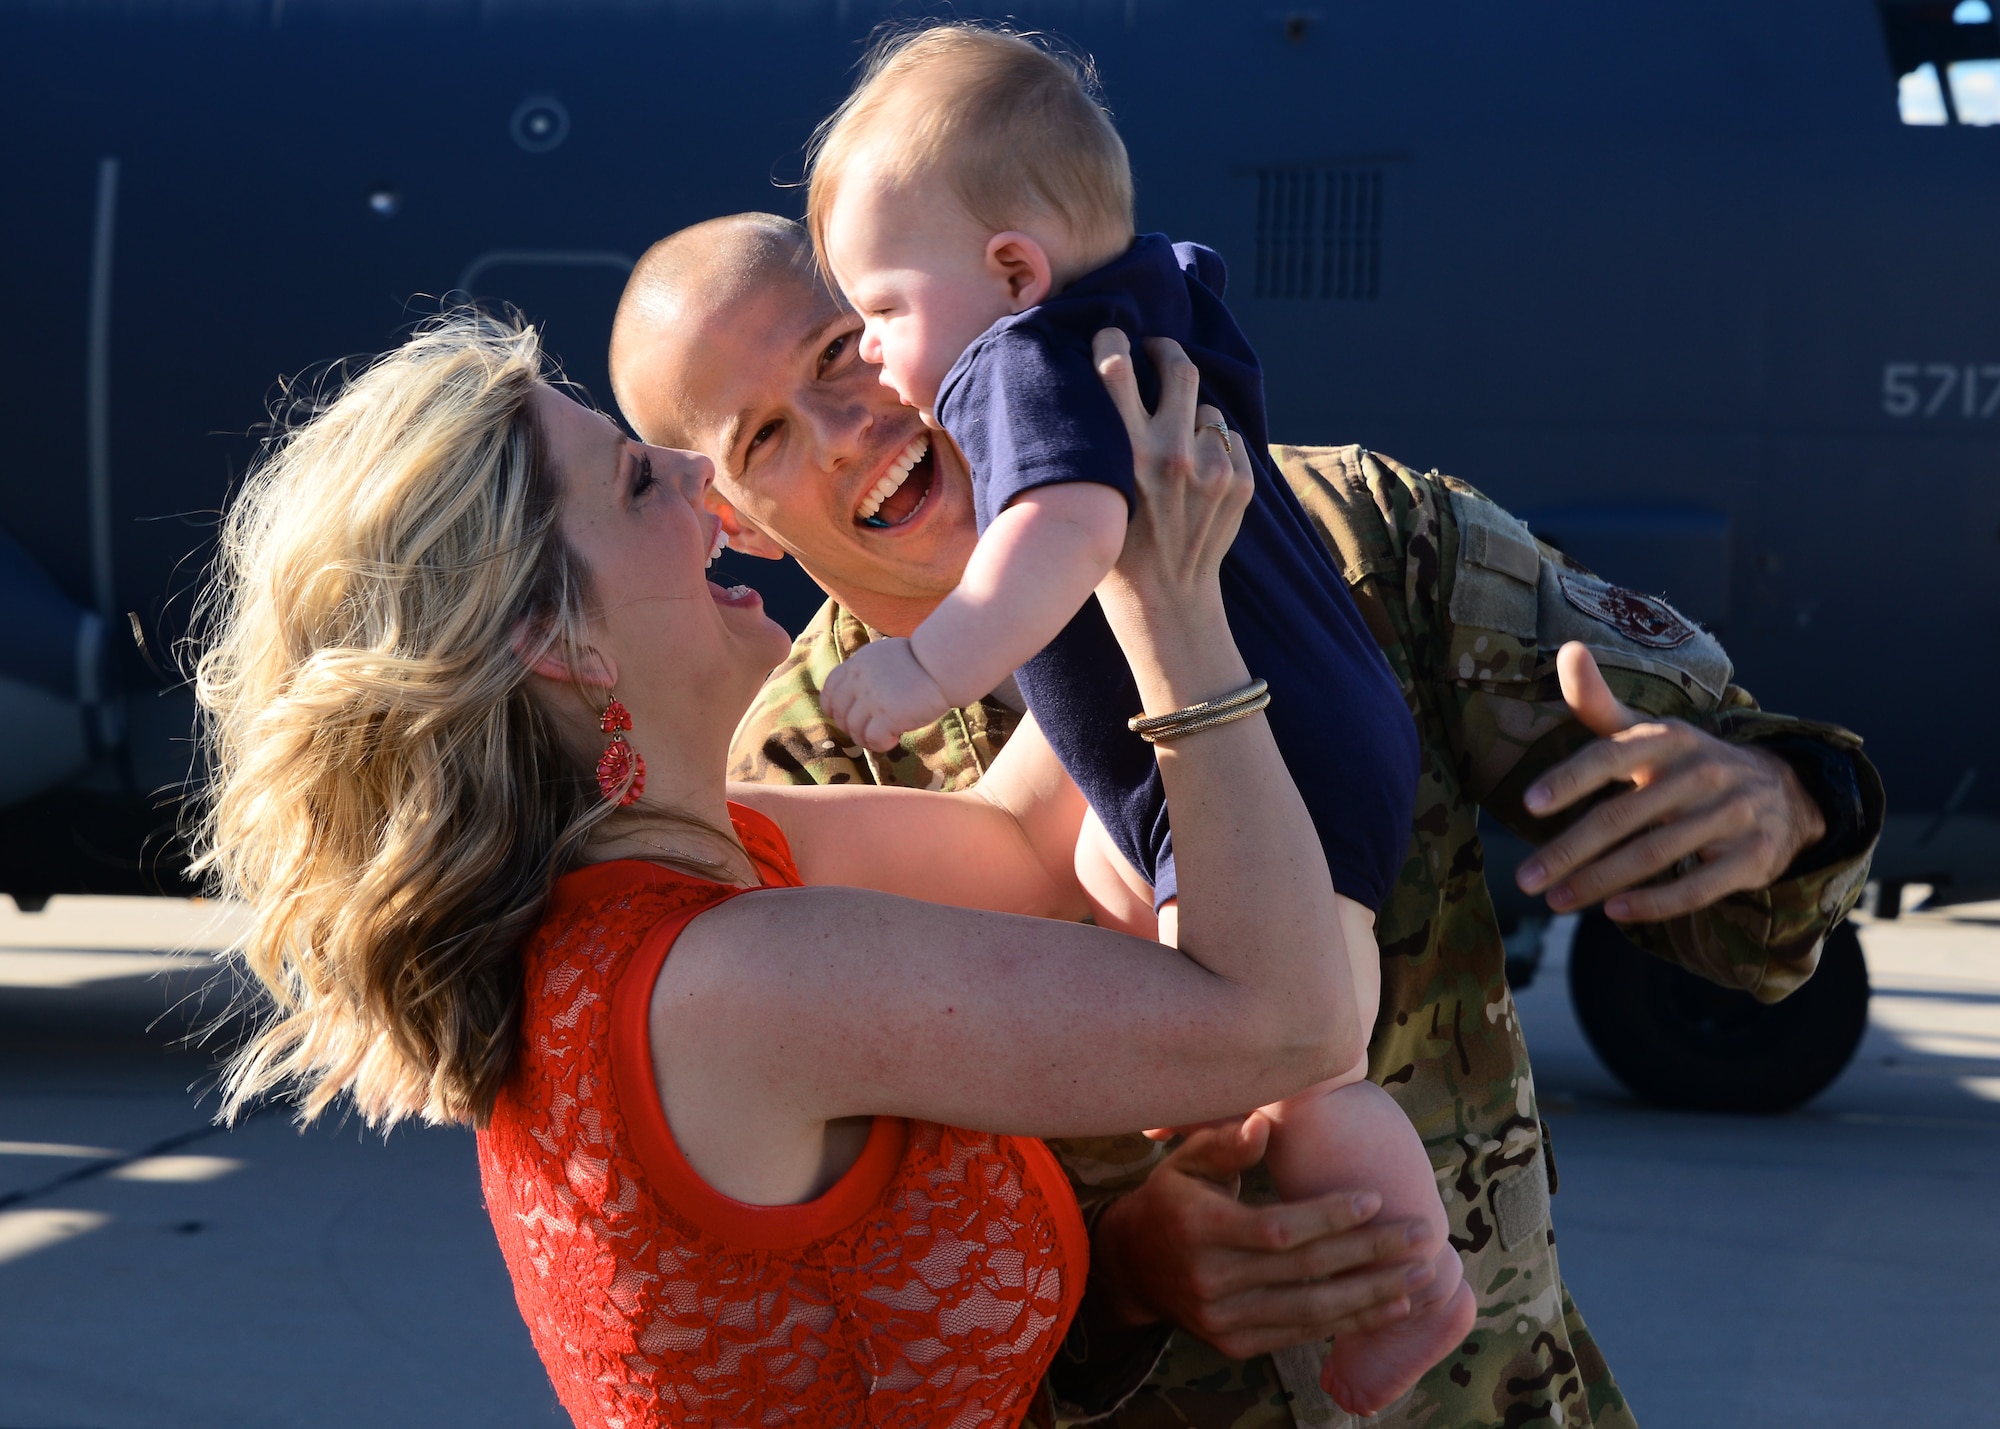 U.S. Air Force Capt. Nick Pettit, 563rd Operation Support Squadron, embraces his family on the flightline at Davis-Monthan Air Force Base, Ariz., Oct. 9, 2015. Two HC-130J Combat King II’s and 25 Airmen returned from a 4-month deployment to Southwest Asia. (U.S. Air Force photo by Airman 1st Class Mya M. Crosby/Released)